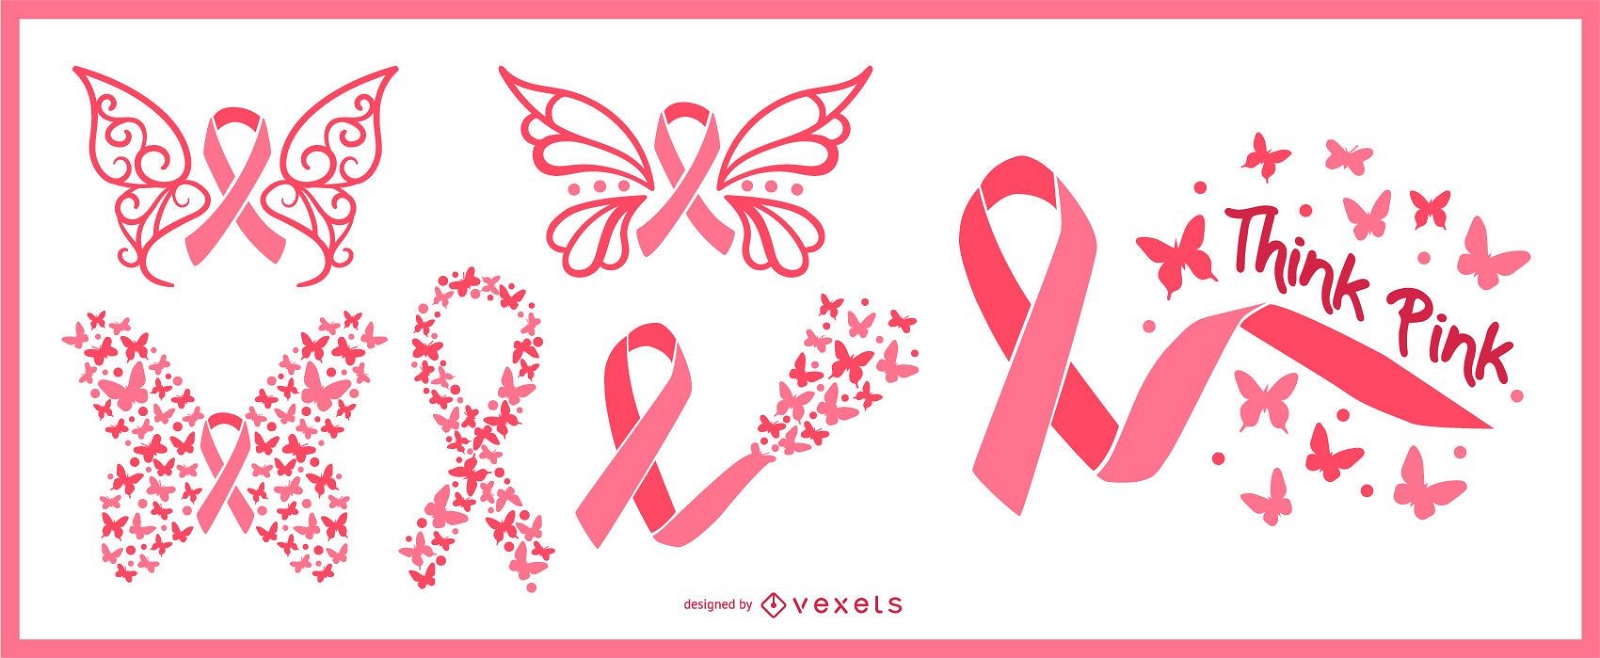 Breast cancer awareness butterfly ribbons 